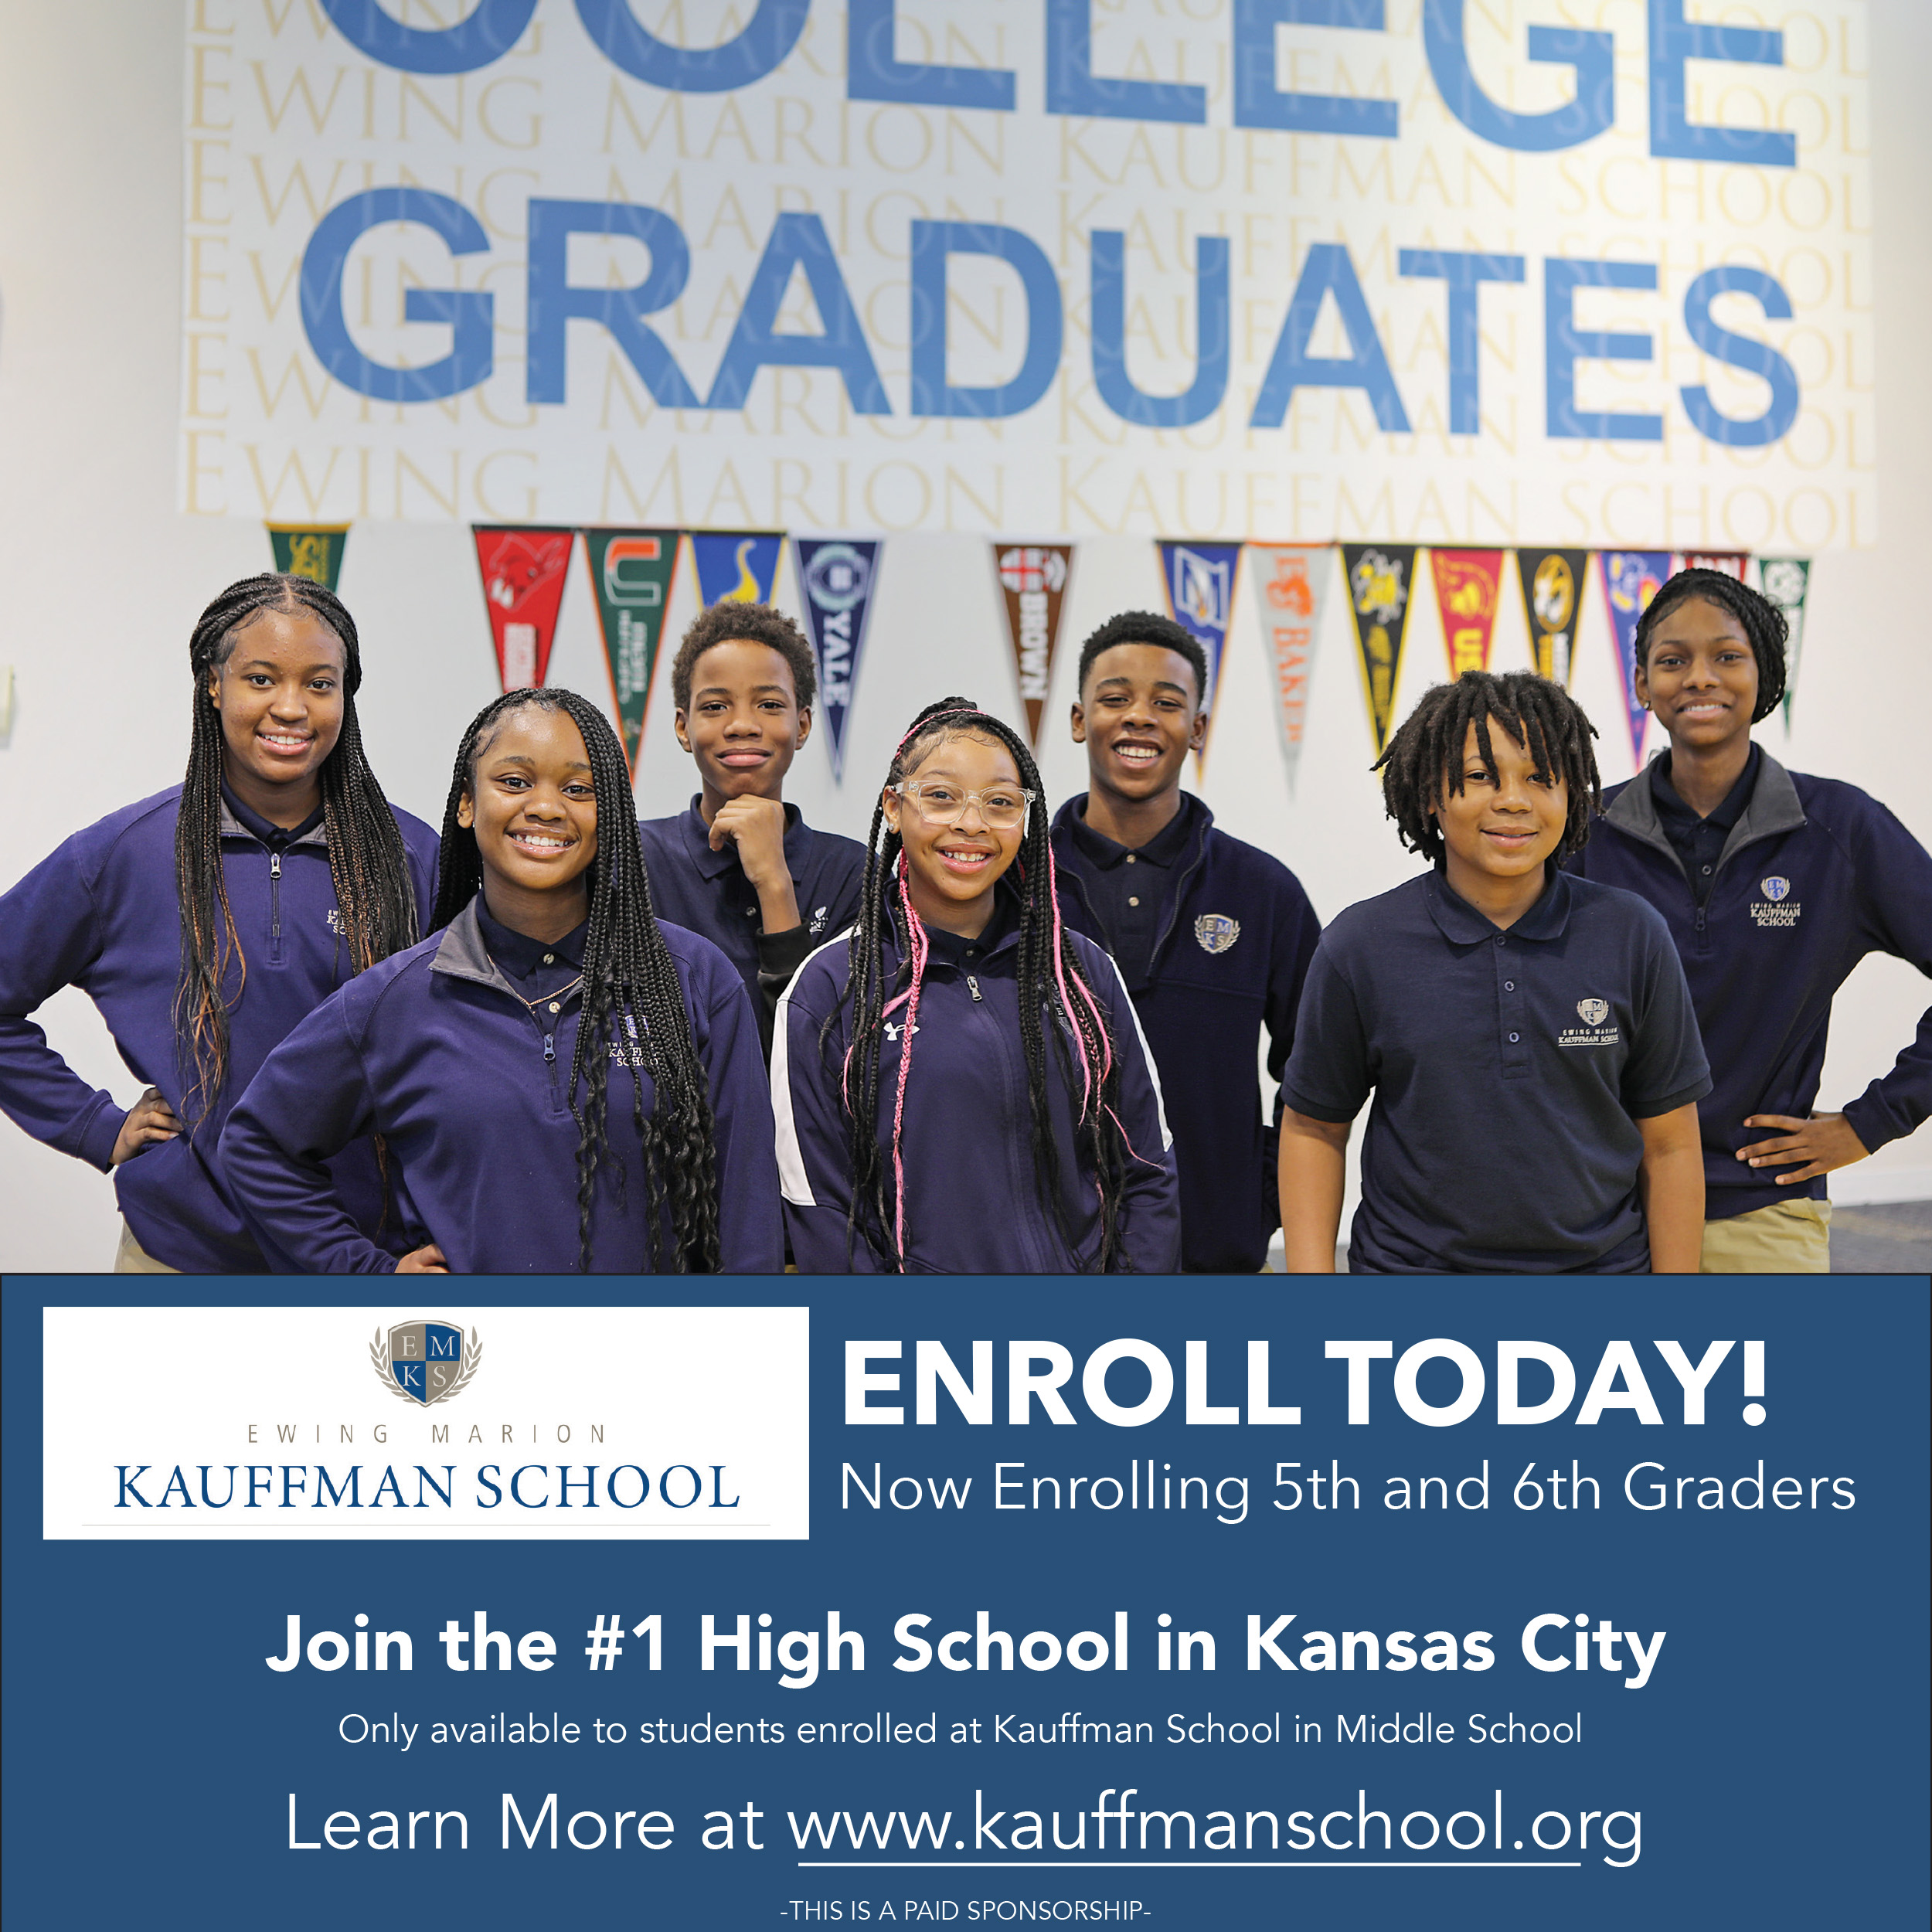 Ewing Marion Kauffman School | ENROLL TODAY! Now Enrolling 5th and 6th Graders | Join the #1 High School in Kansas City | Only available to students enrolled at Kauffman School in Middle School | Learn More at www.kauffmanschool.org | -THIS IS A PAID SPONSORSHIP-